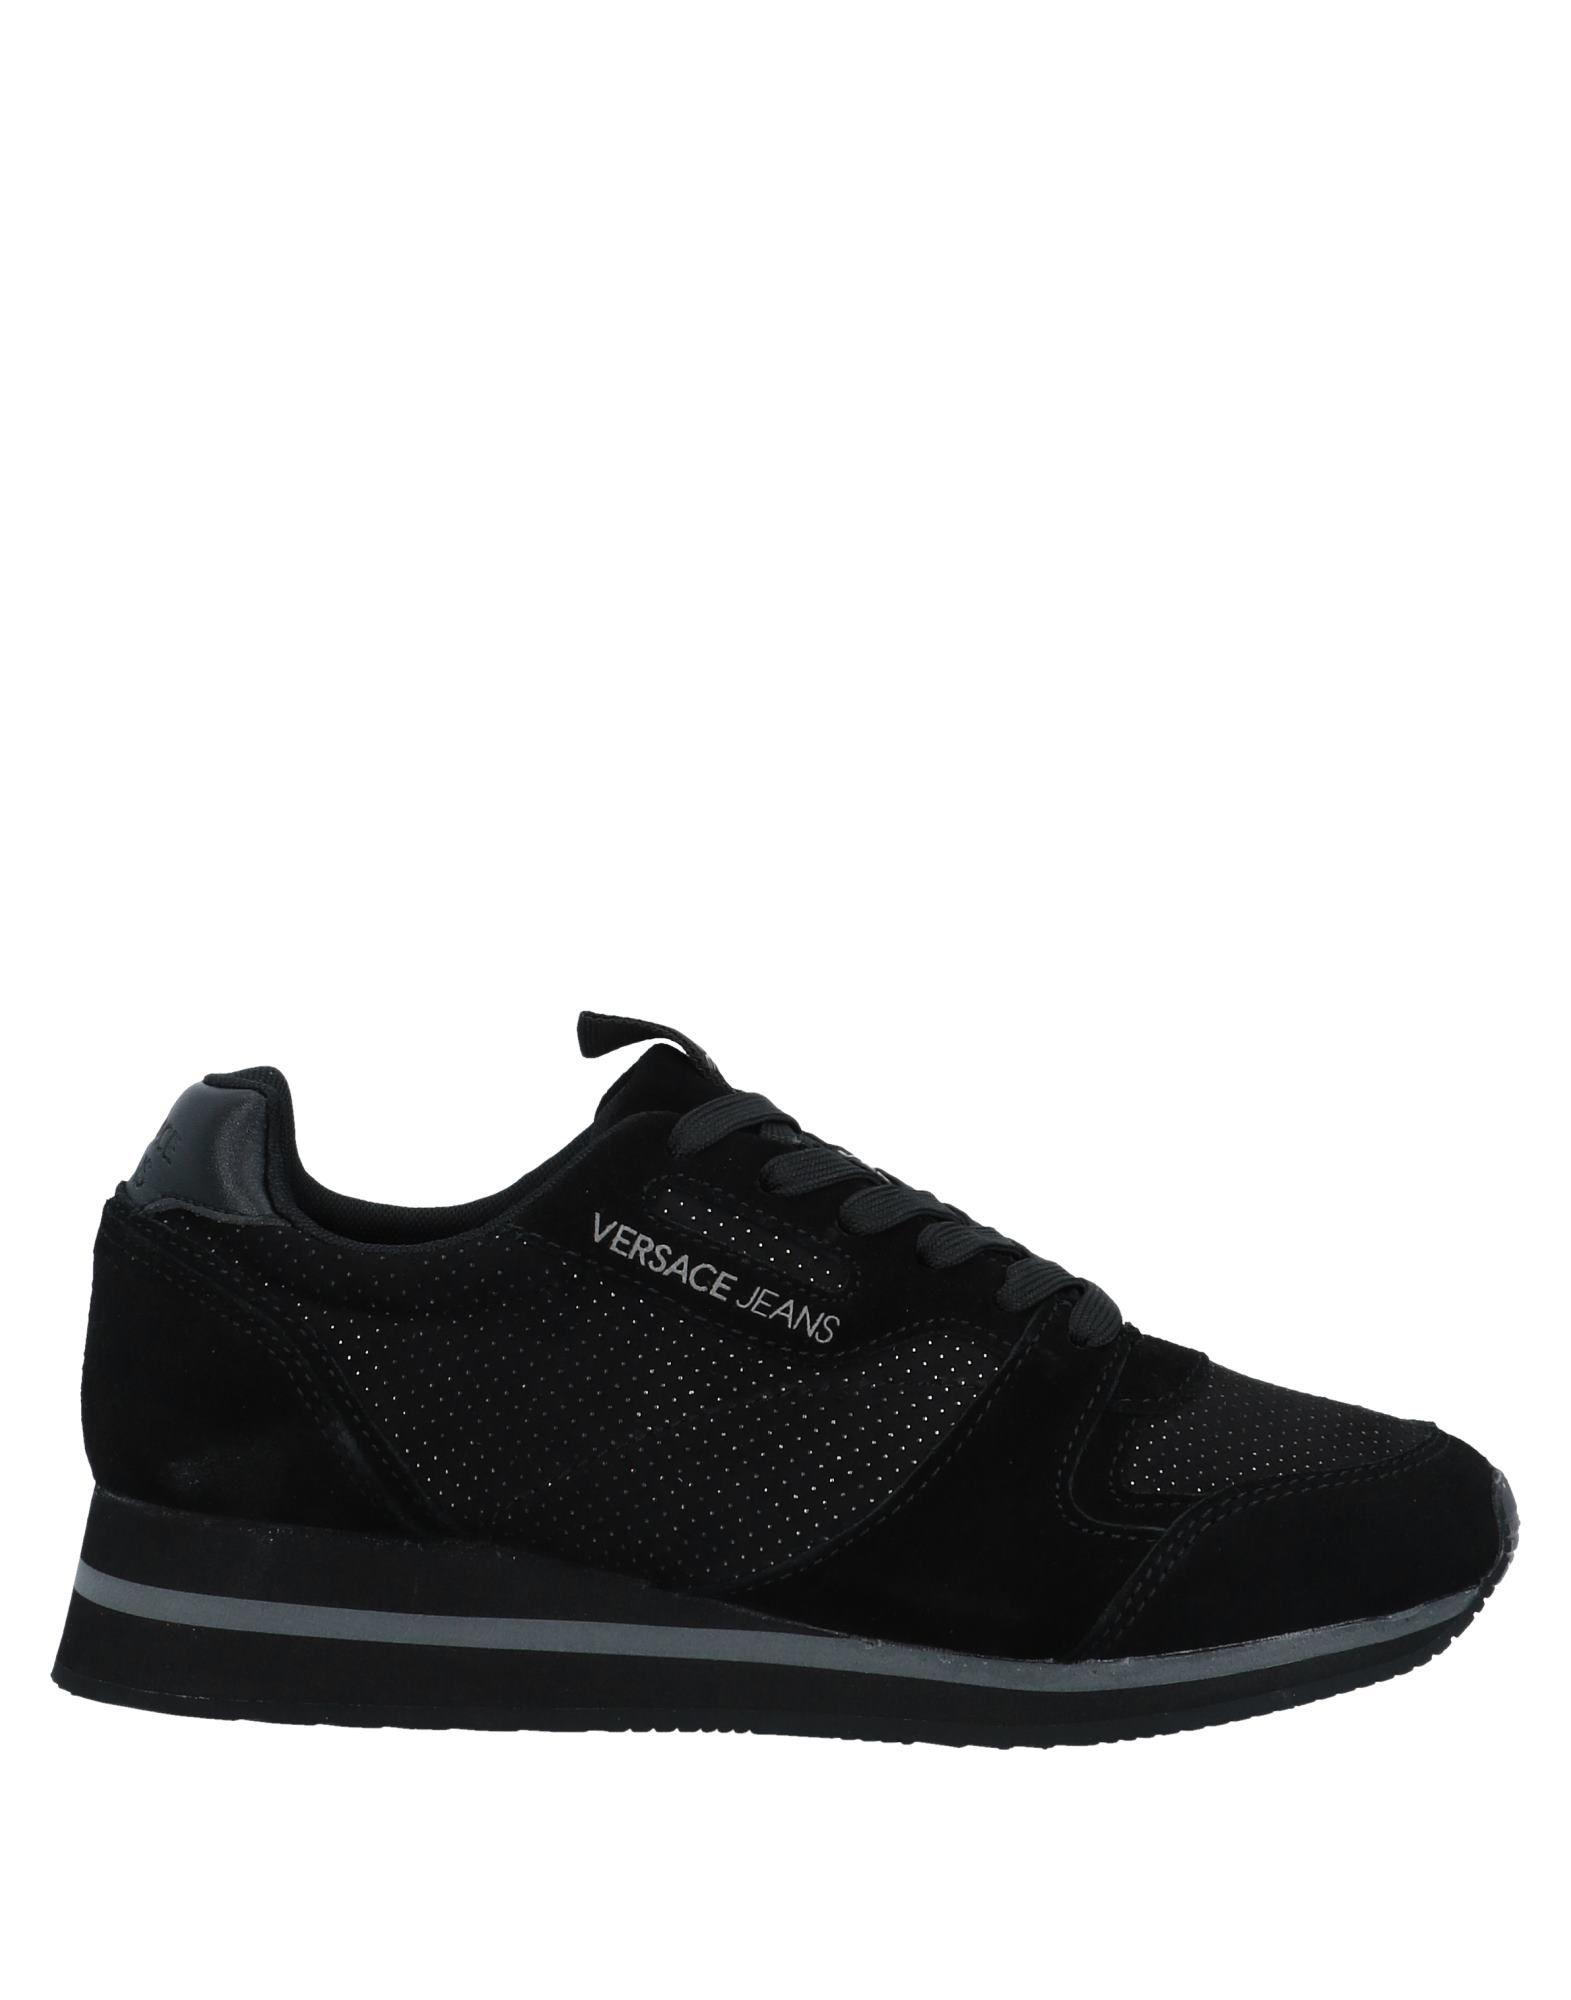 Versace Jeans Leather Low-tops & Sneakers in Black - Lyst